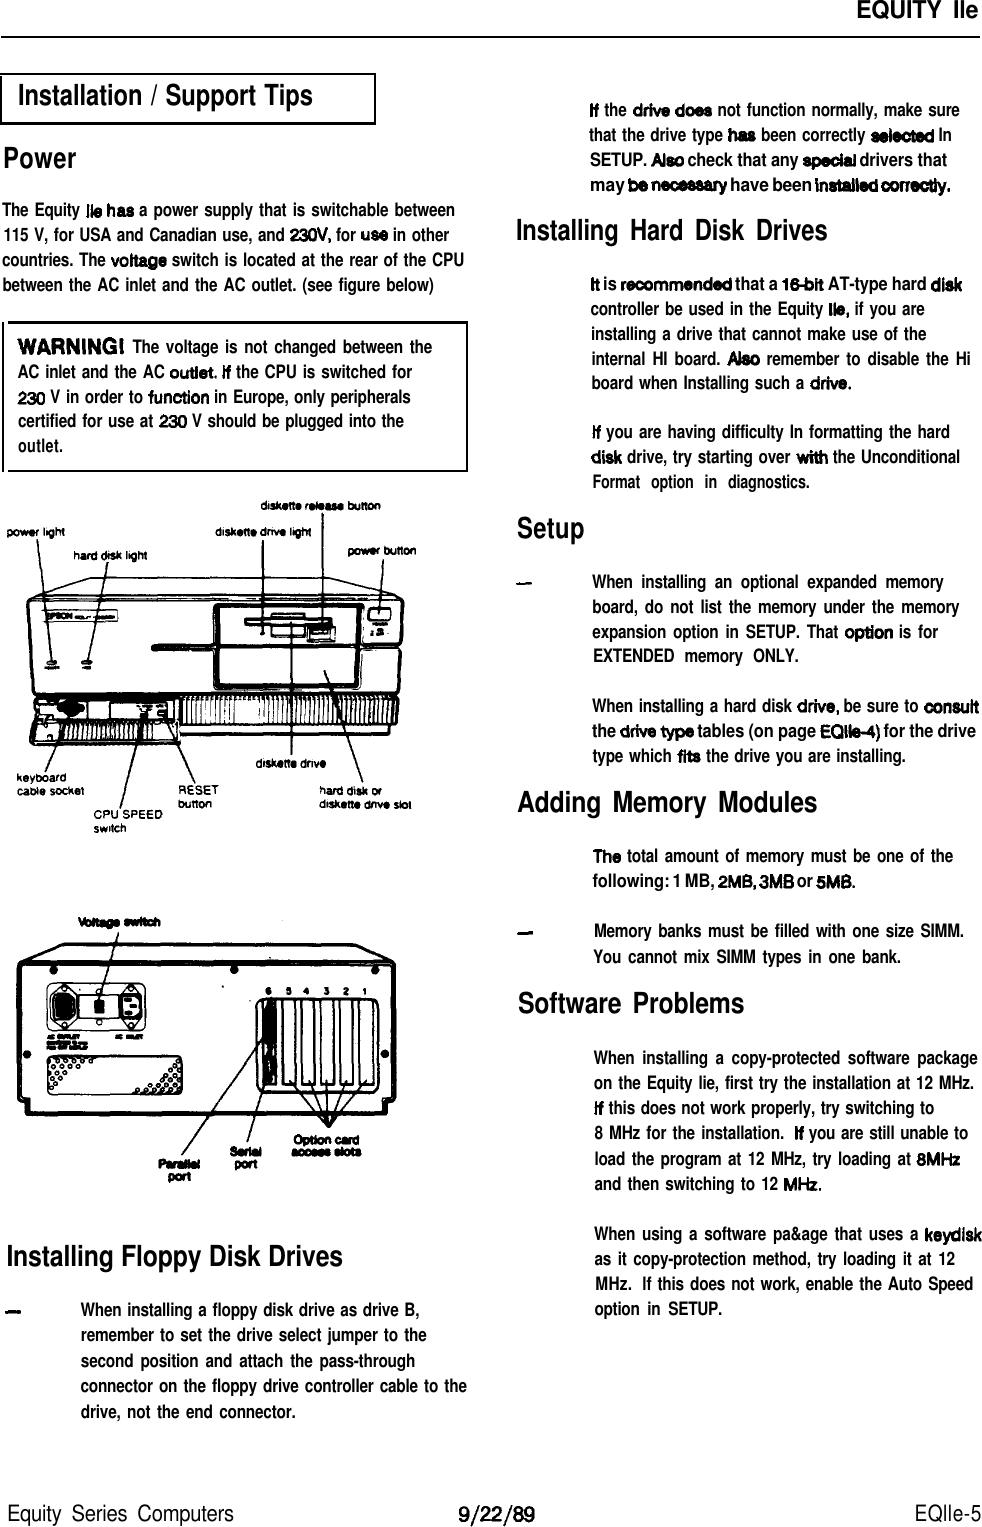 Page 5 of 7 - Epson Epson-Epson-Equity-Iie-Product-Information-Guide- Equity IIe - Product Information Guide  Epson-epson-equity-iie-product-information-guide